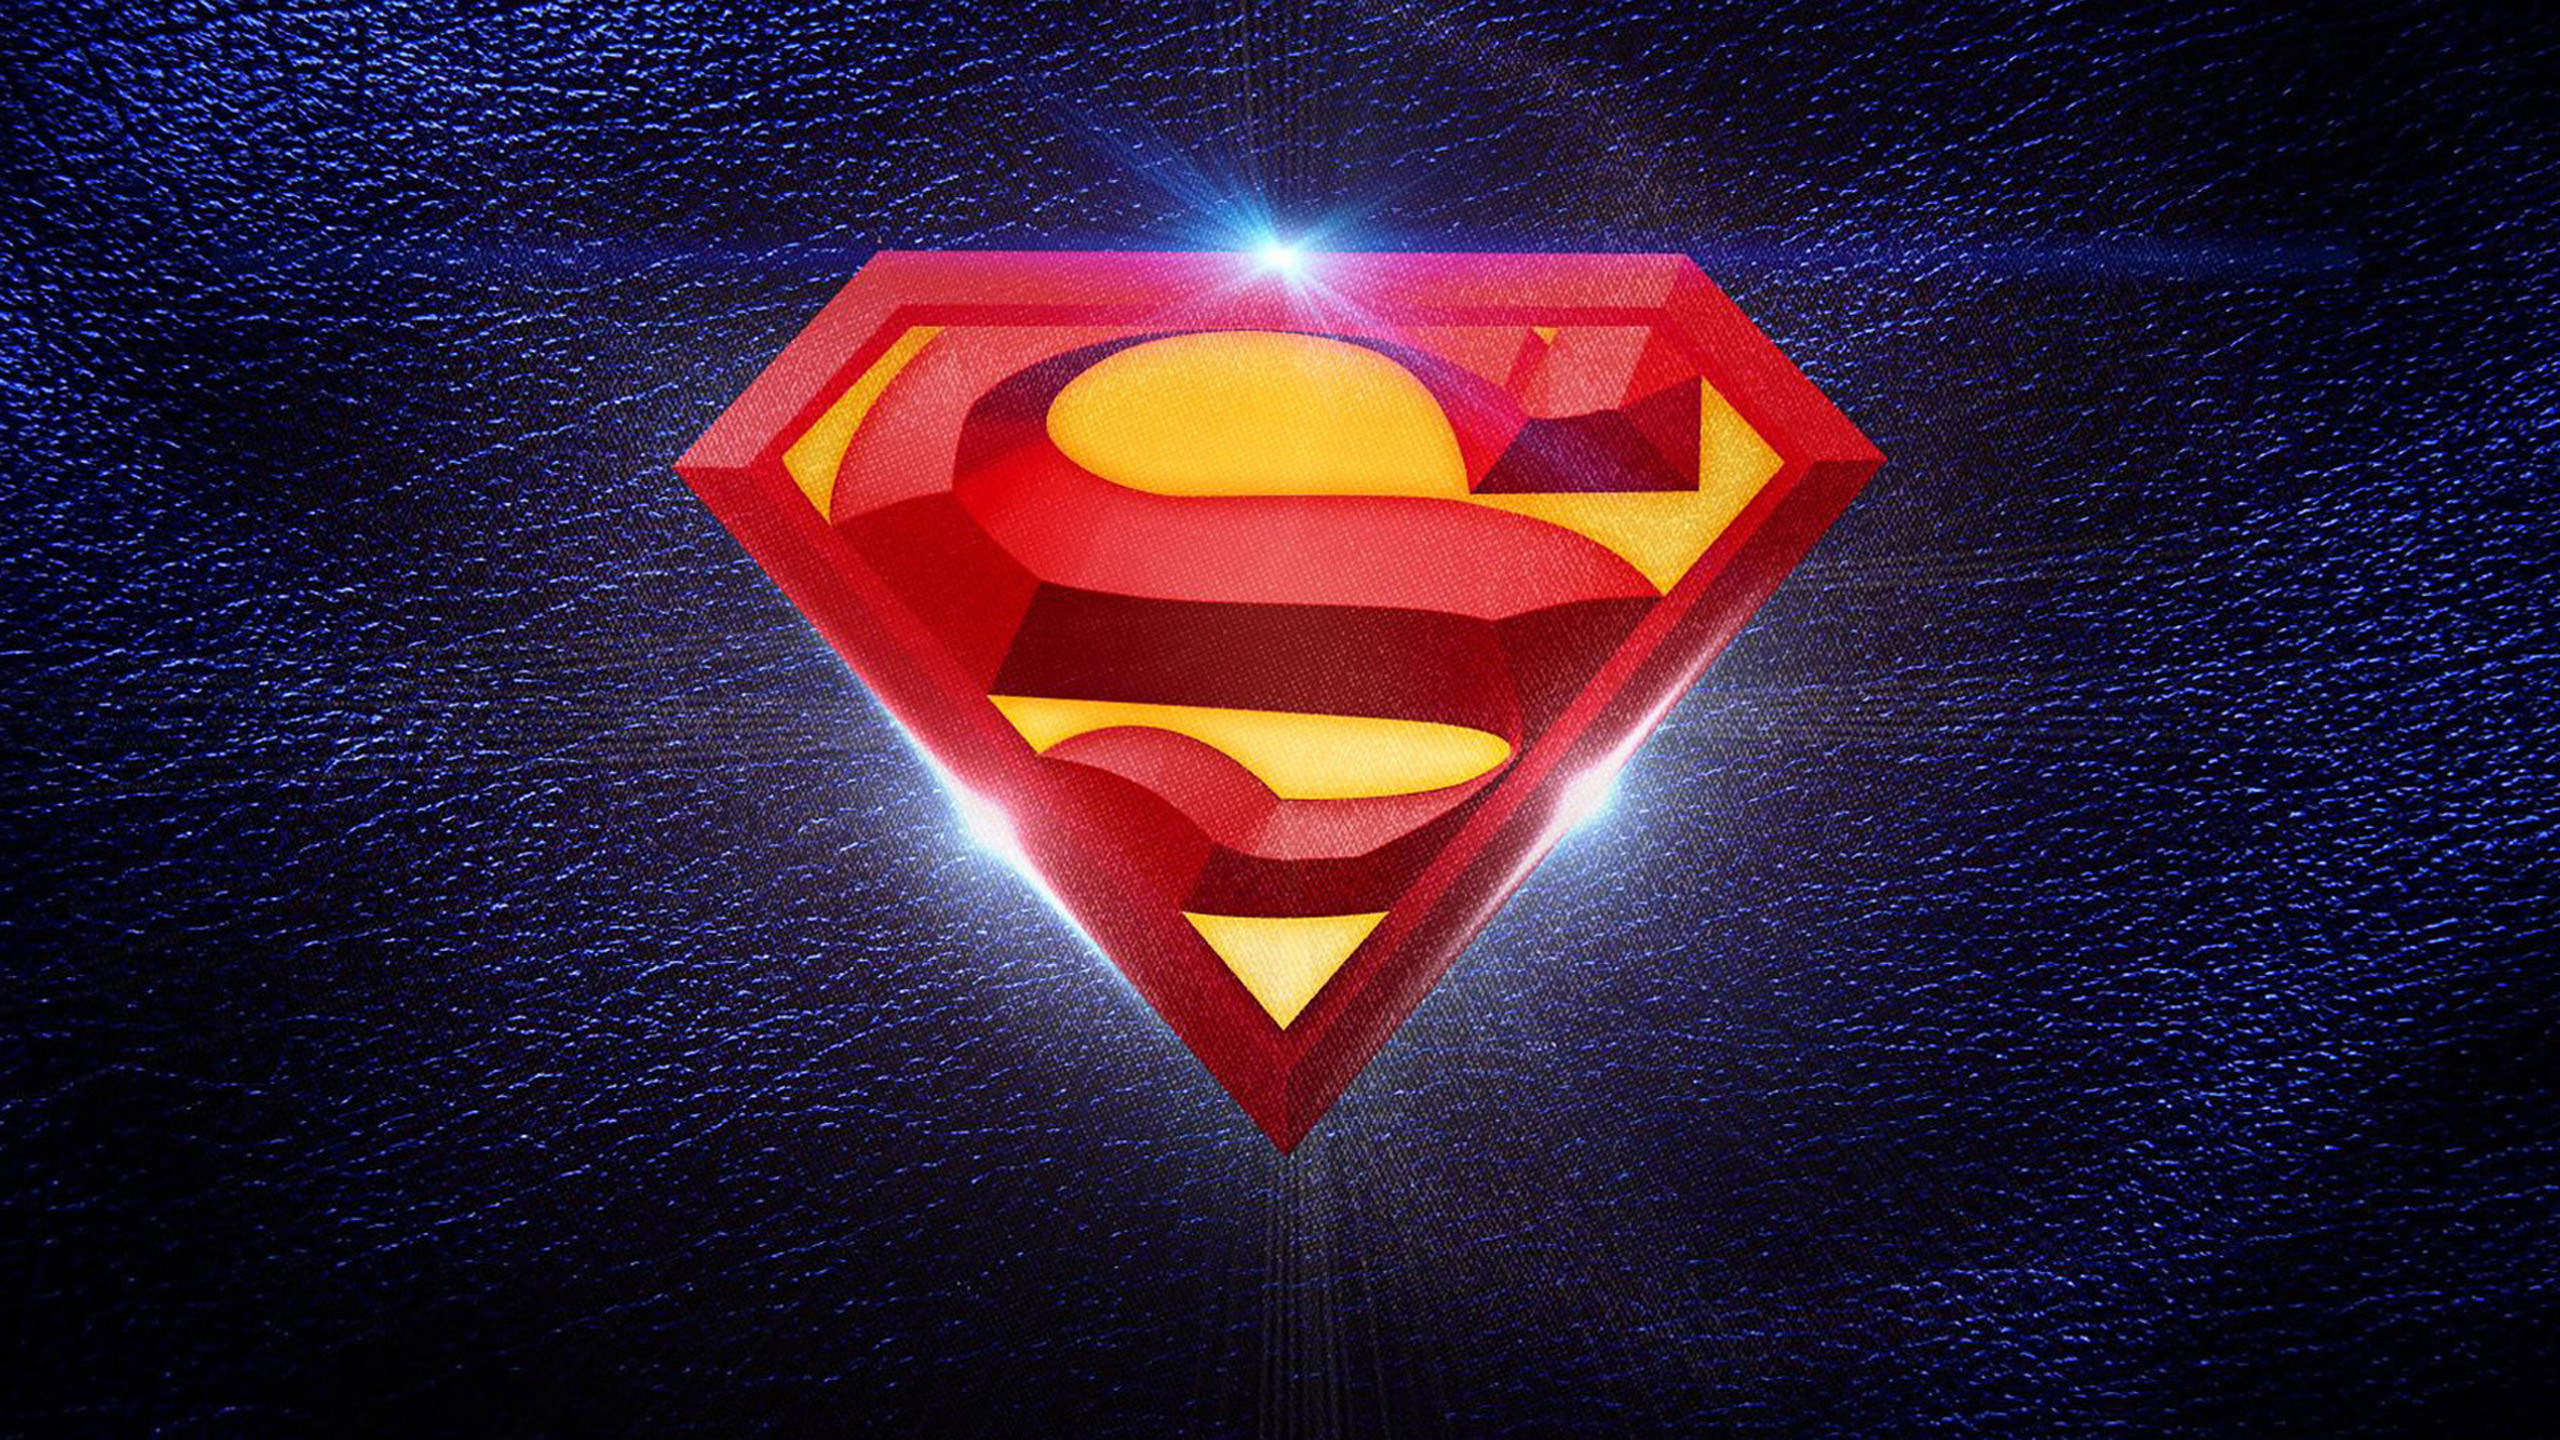 2560x1440 wallpaper.wiki-Superman-Logo-Ipad-HD-Pictures-PIC-